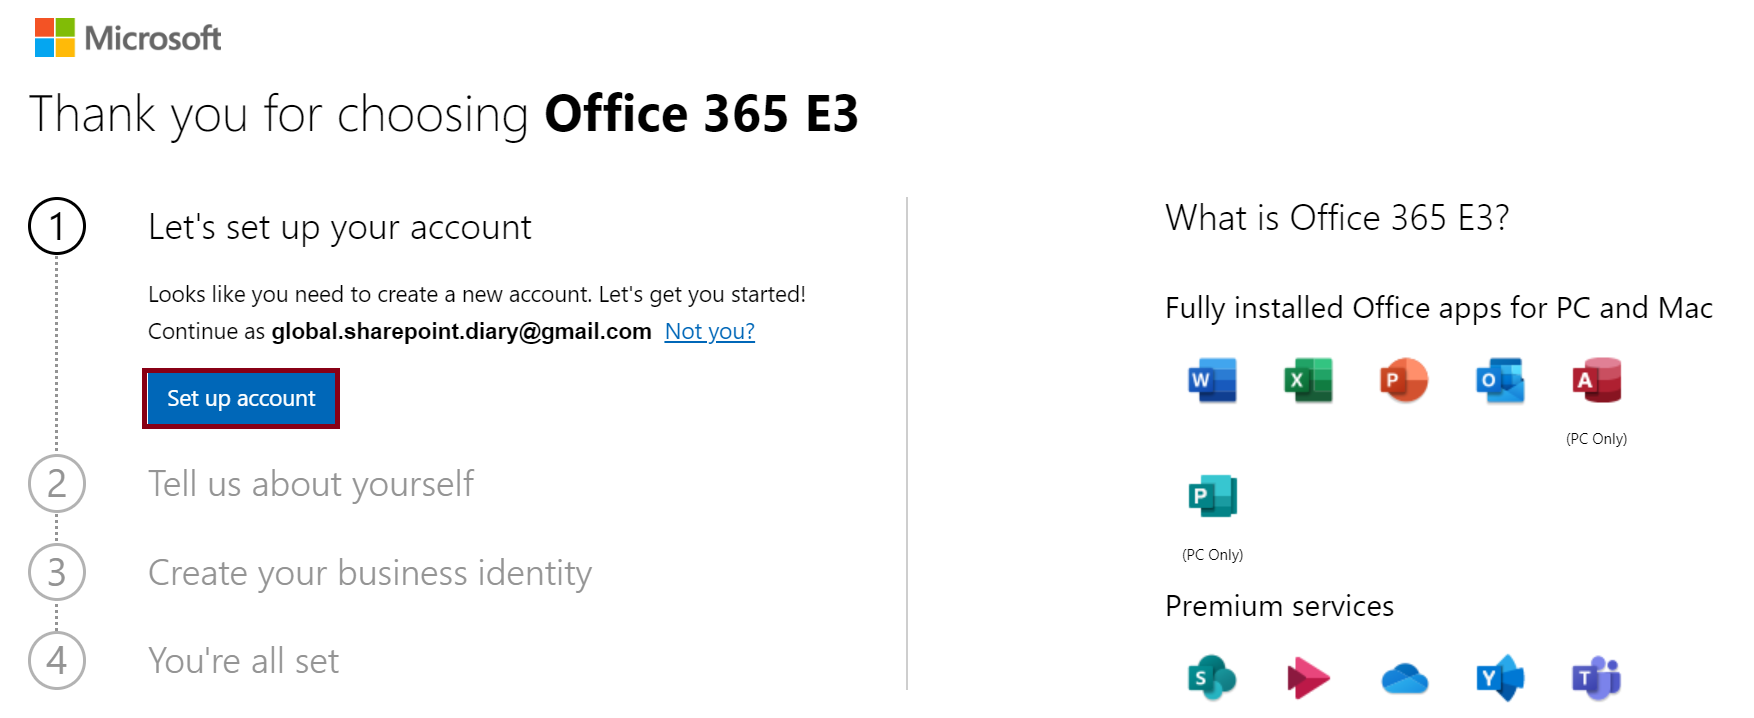 Office 365 E3 Trial - Set up account